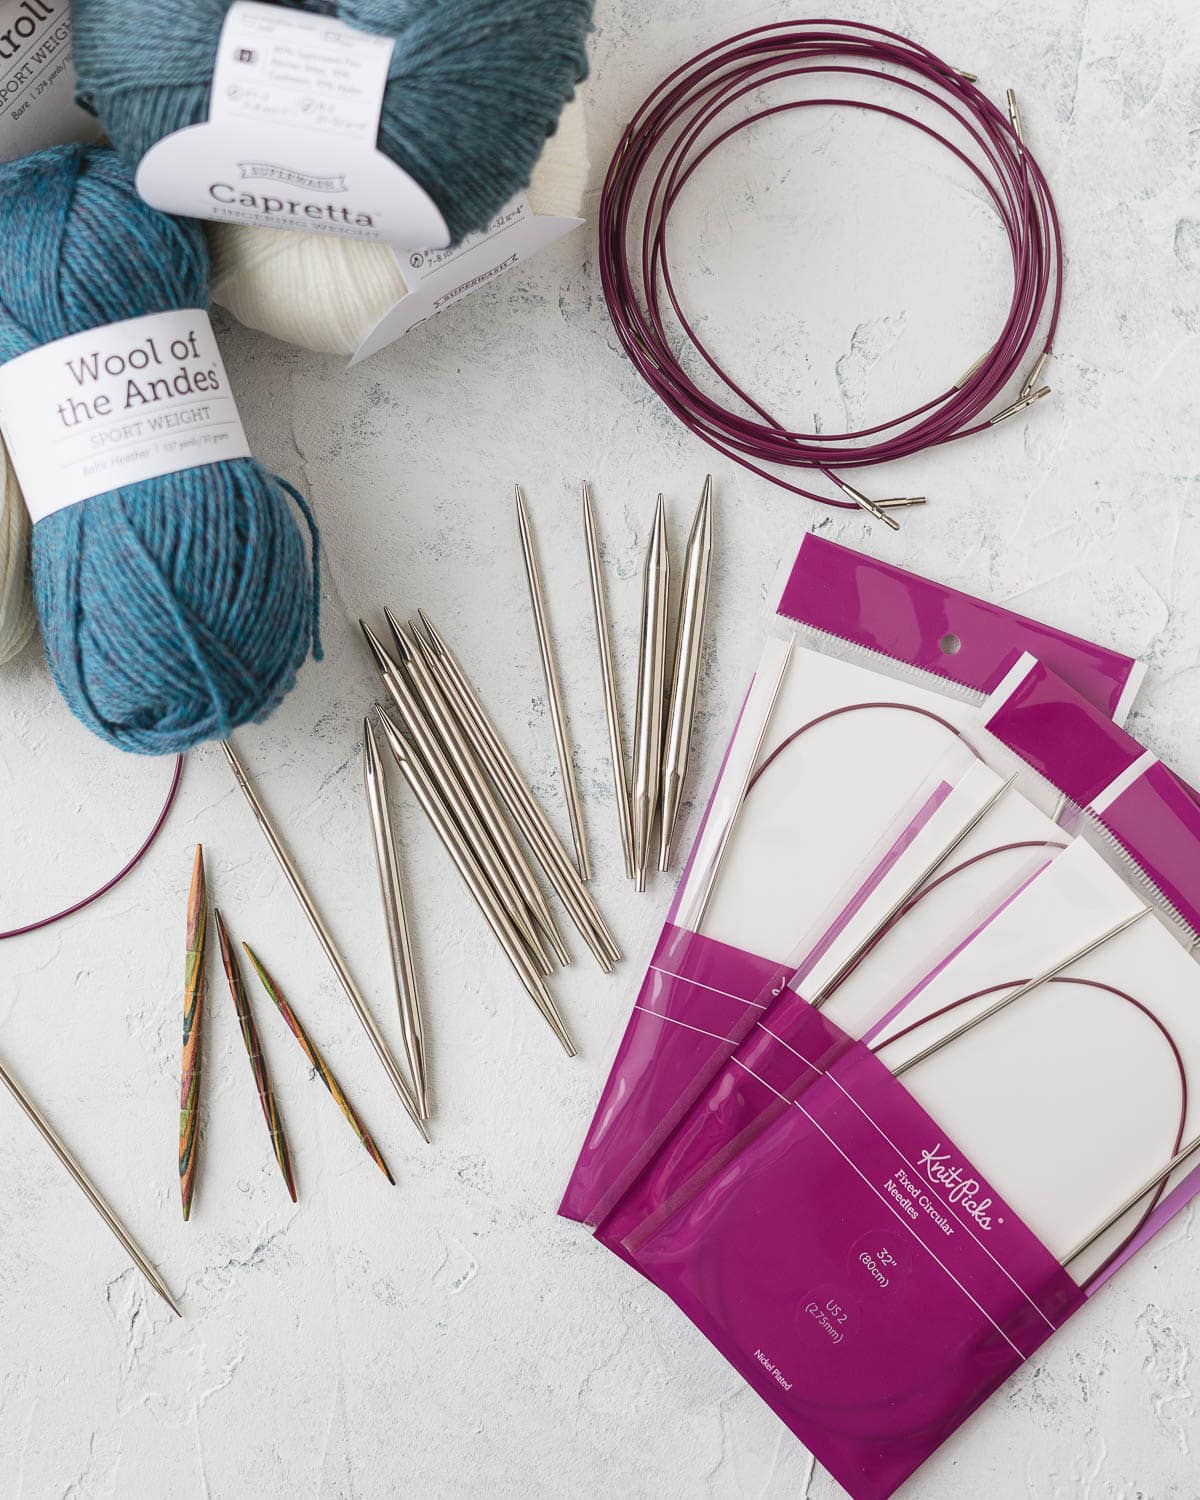 Nickel plated interchangeable knitting needle set, cables, additional fixed needles, and yarn.